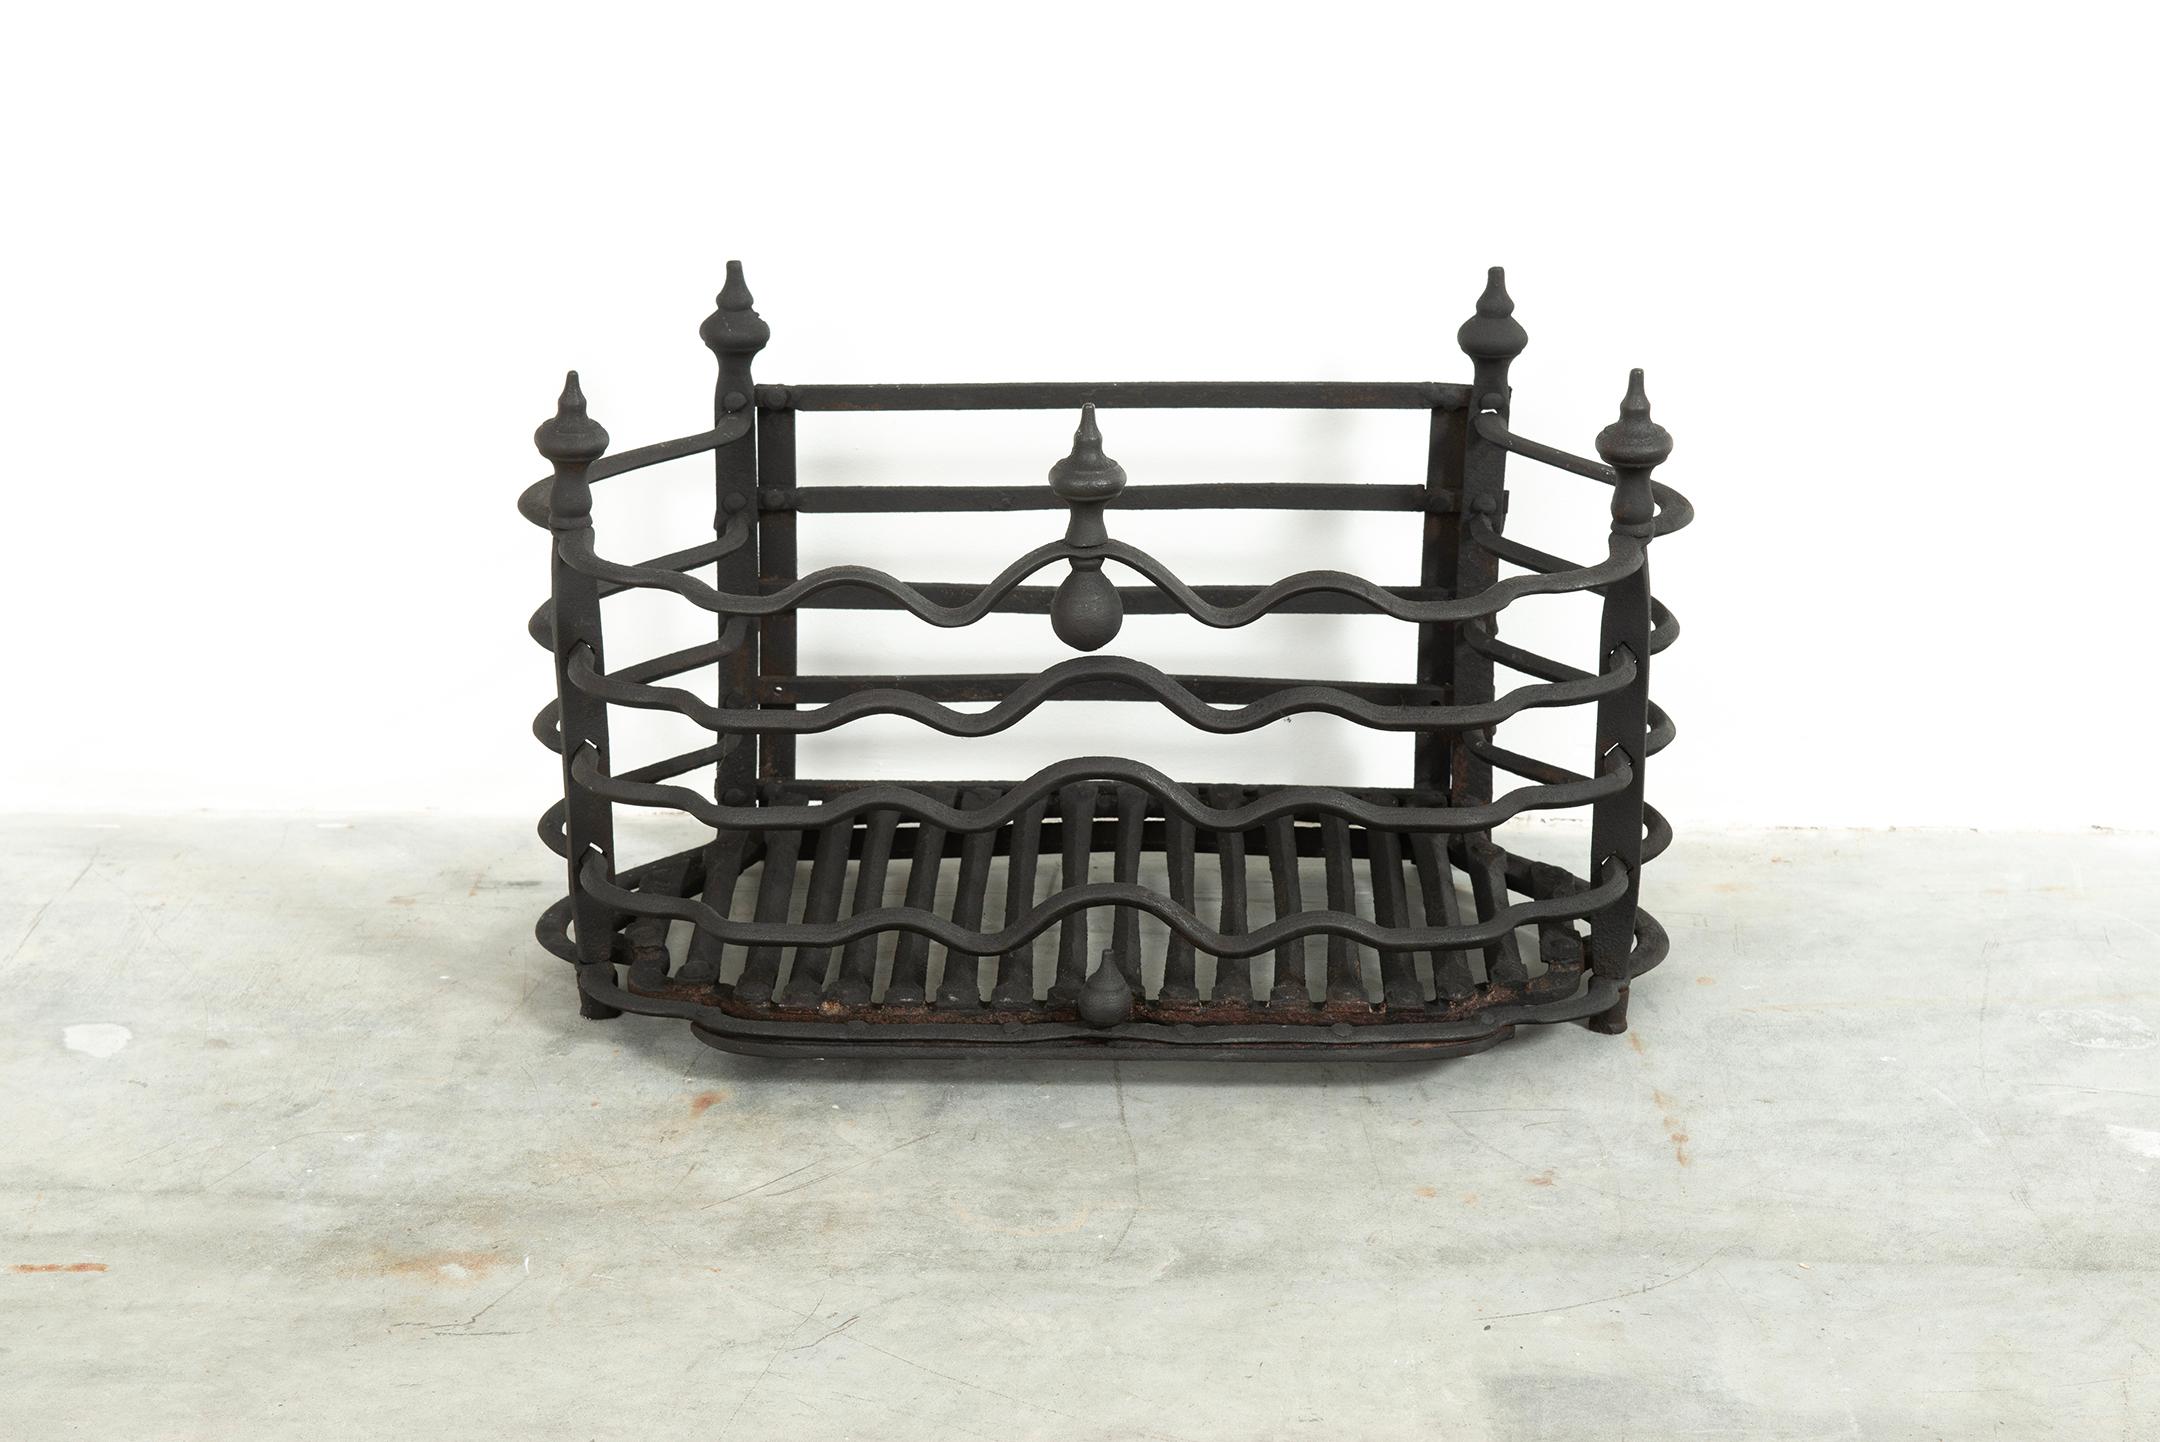 Very decent sized French firegrate or fireplace basket.
The elegant shaped wrought iron bars and rounded shape make this a pleasure to look at.

Very good and usable condition, can be used in a real fire or to have a gas insert installed.